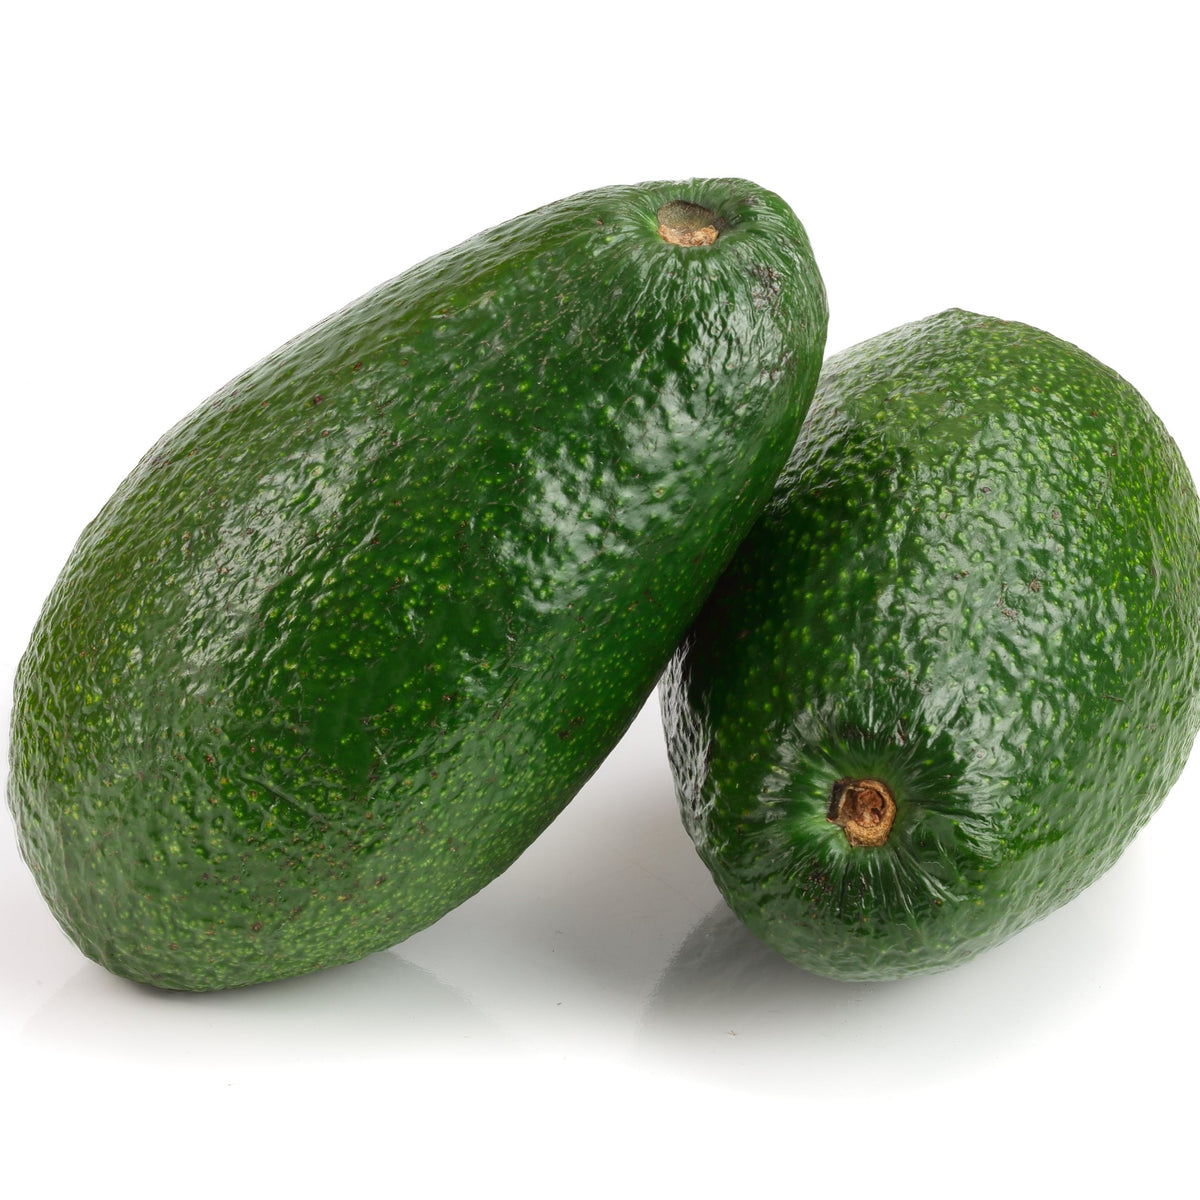 Sharwil Avocado - The Green Gold of Avocados - Grafted